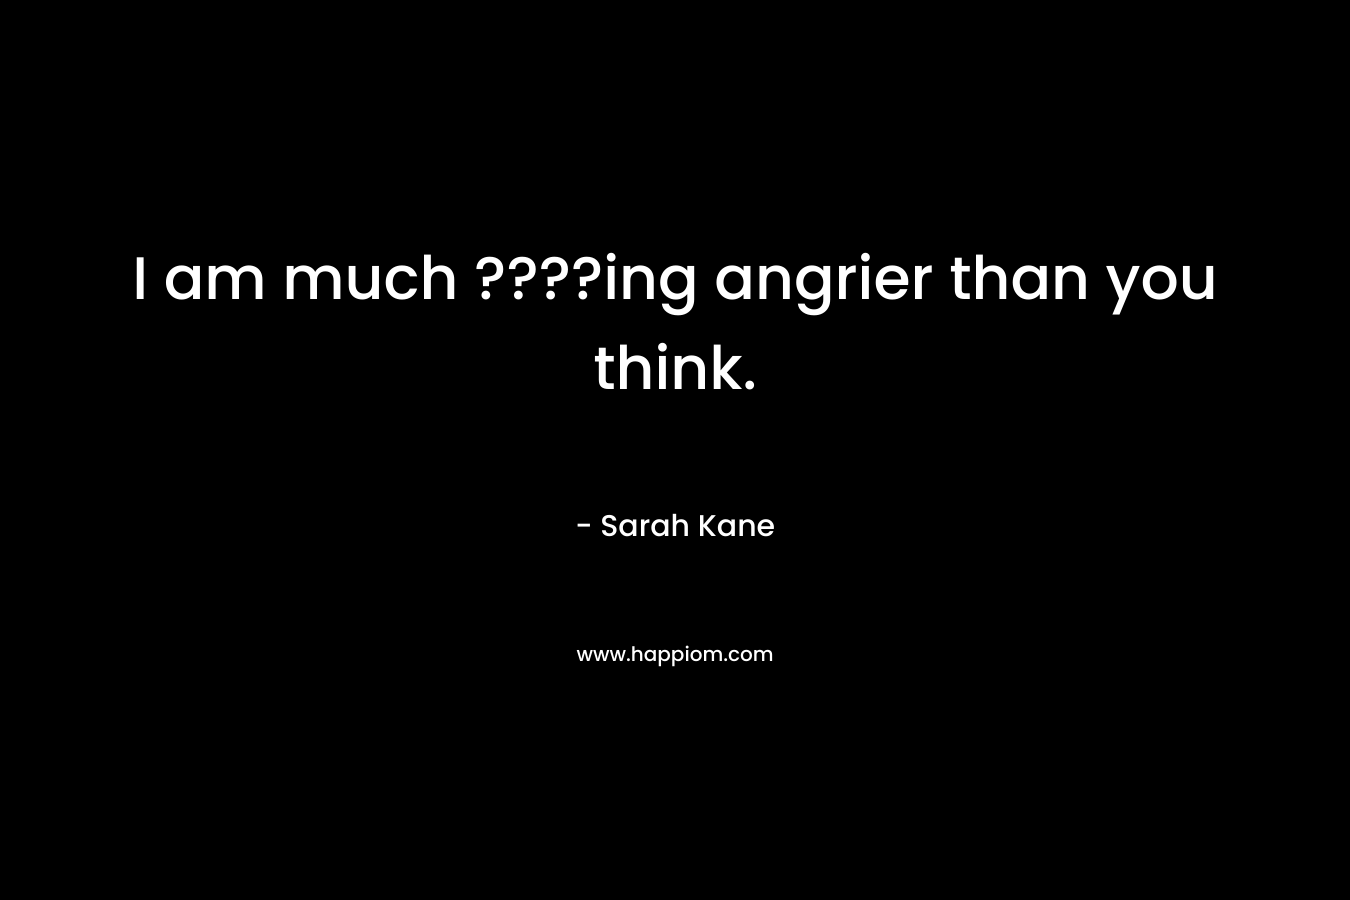 I am much ????ing angrier than you think. – Sarah Kane